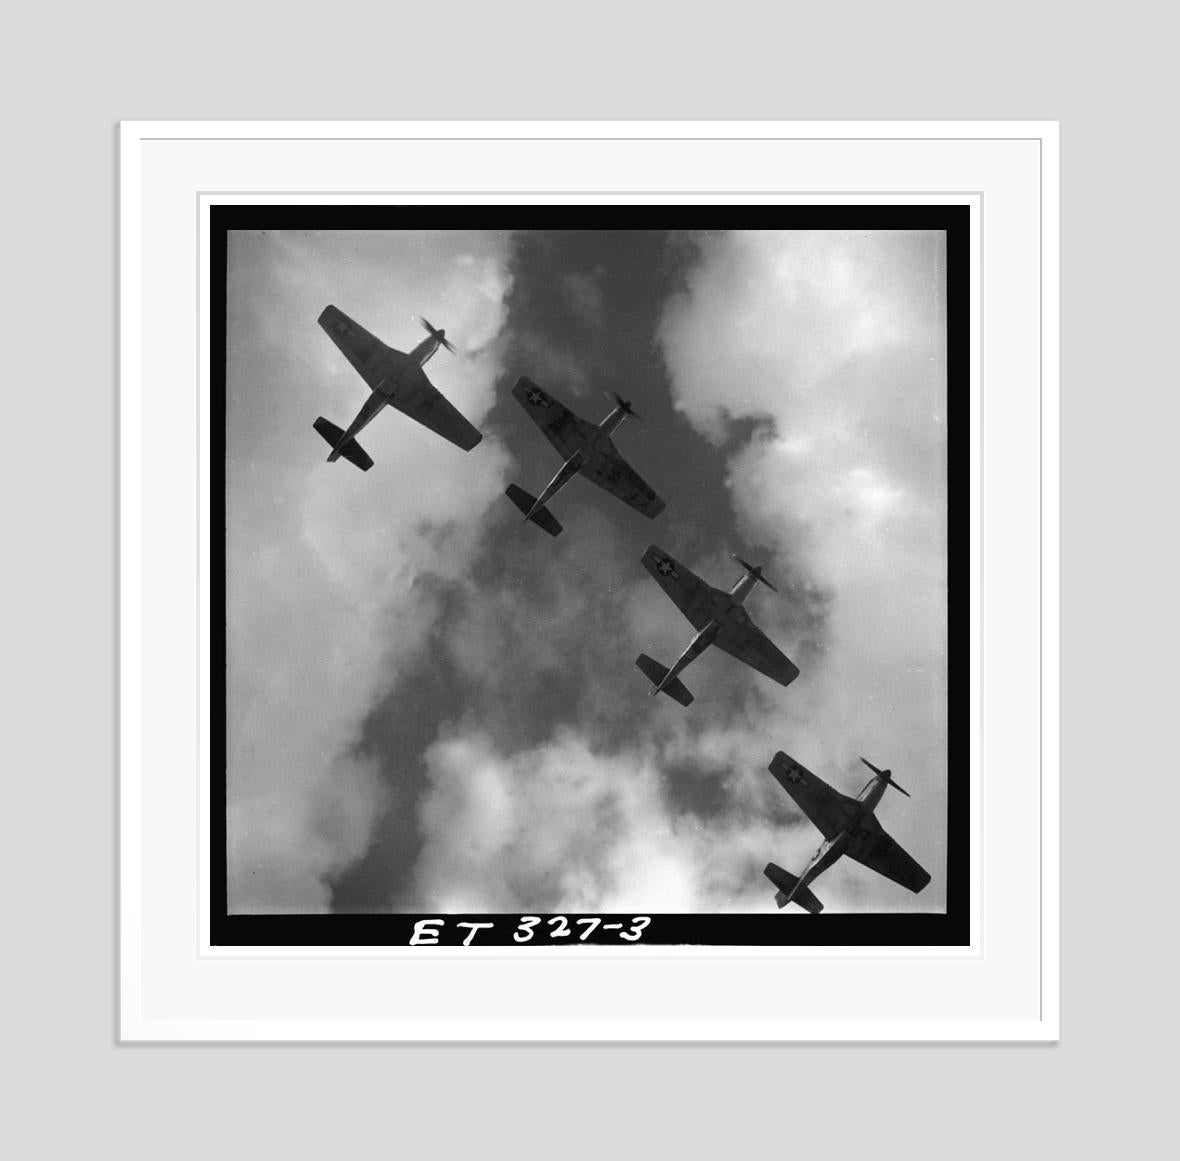 Mustangs In Flight

1945

Four P-51 Mustangs fly in formation, Ramitelli, Italy 1945. 

by Toni Frissell

30 x 30